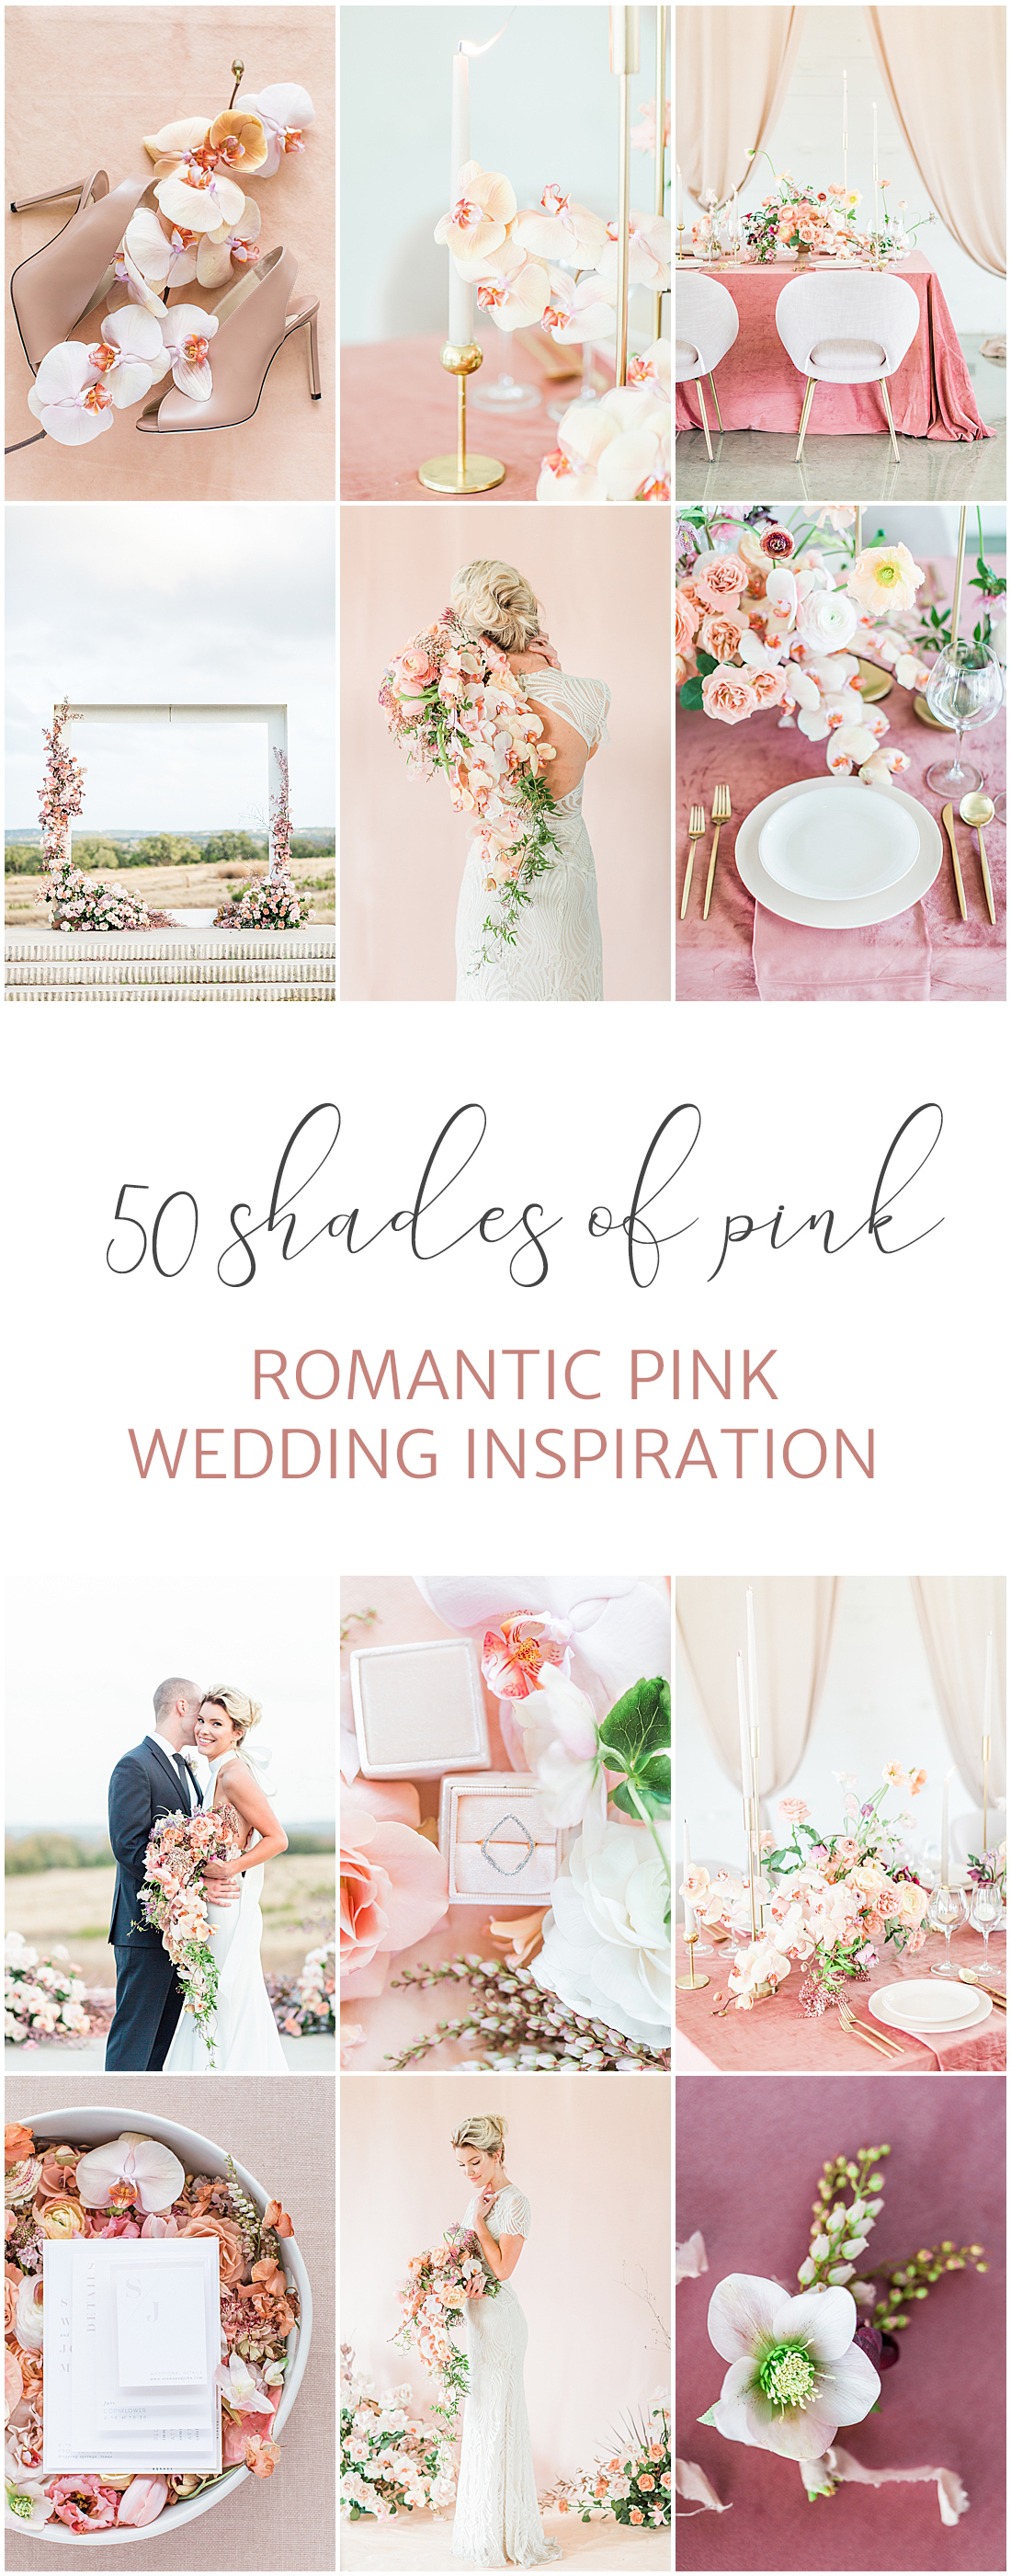 romantic pink wedding inspiration for spring at prospect house dripping springs texas